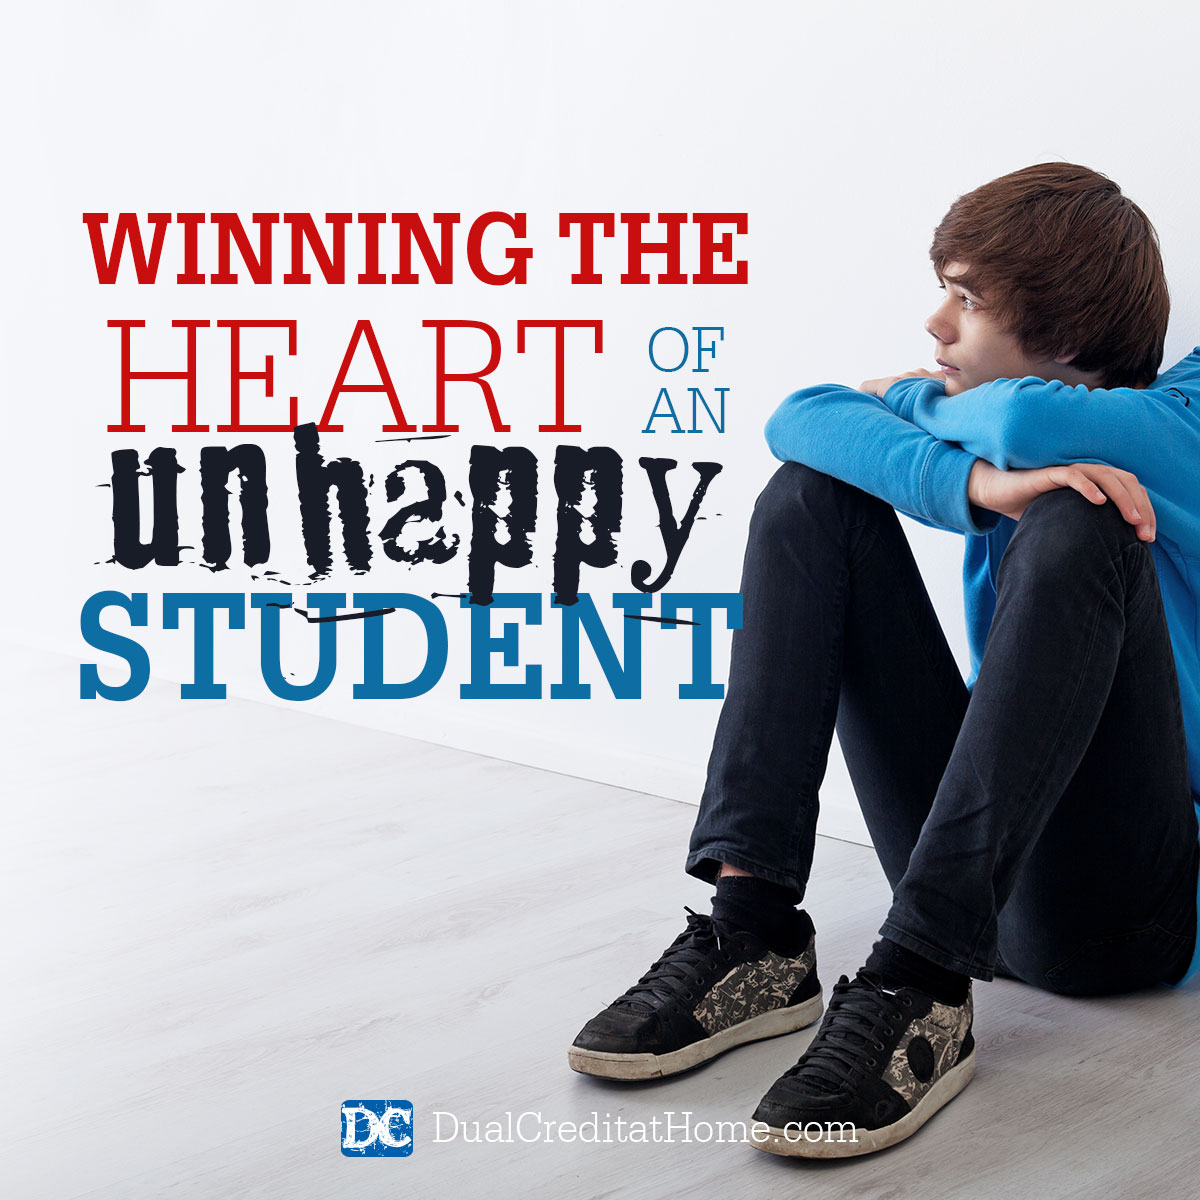 Winning the Heart of an Unhappy Student